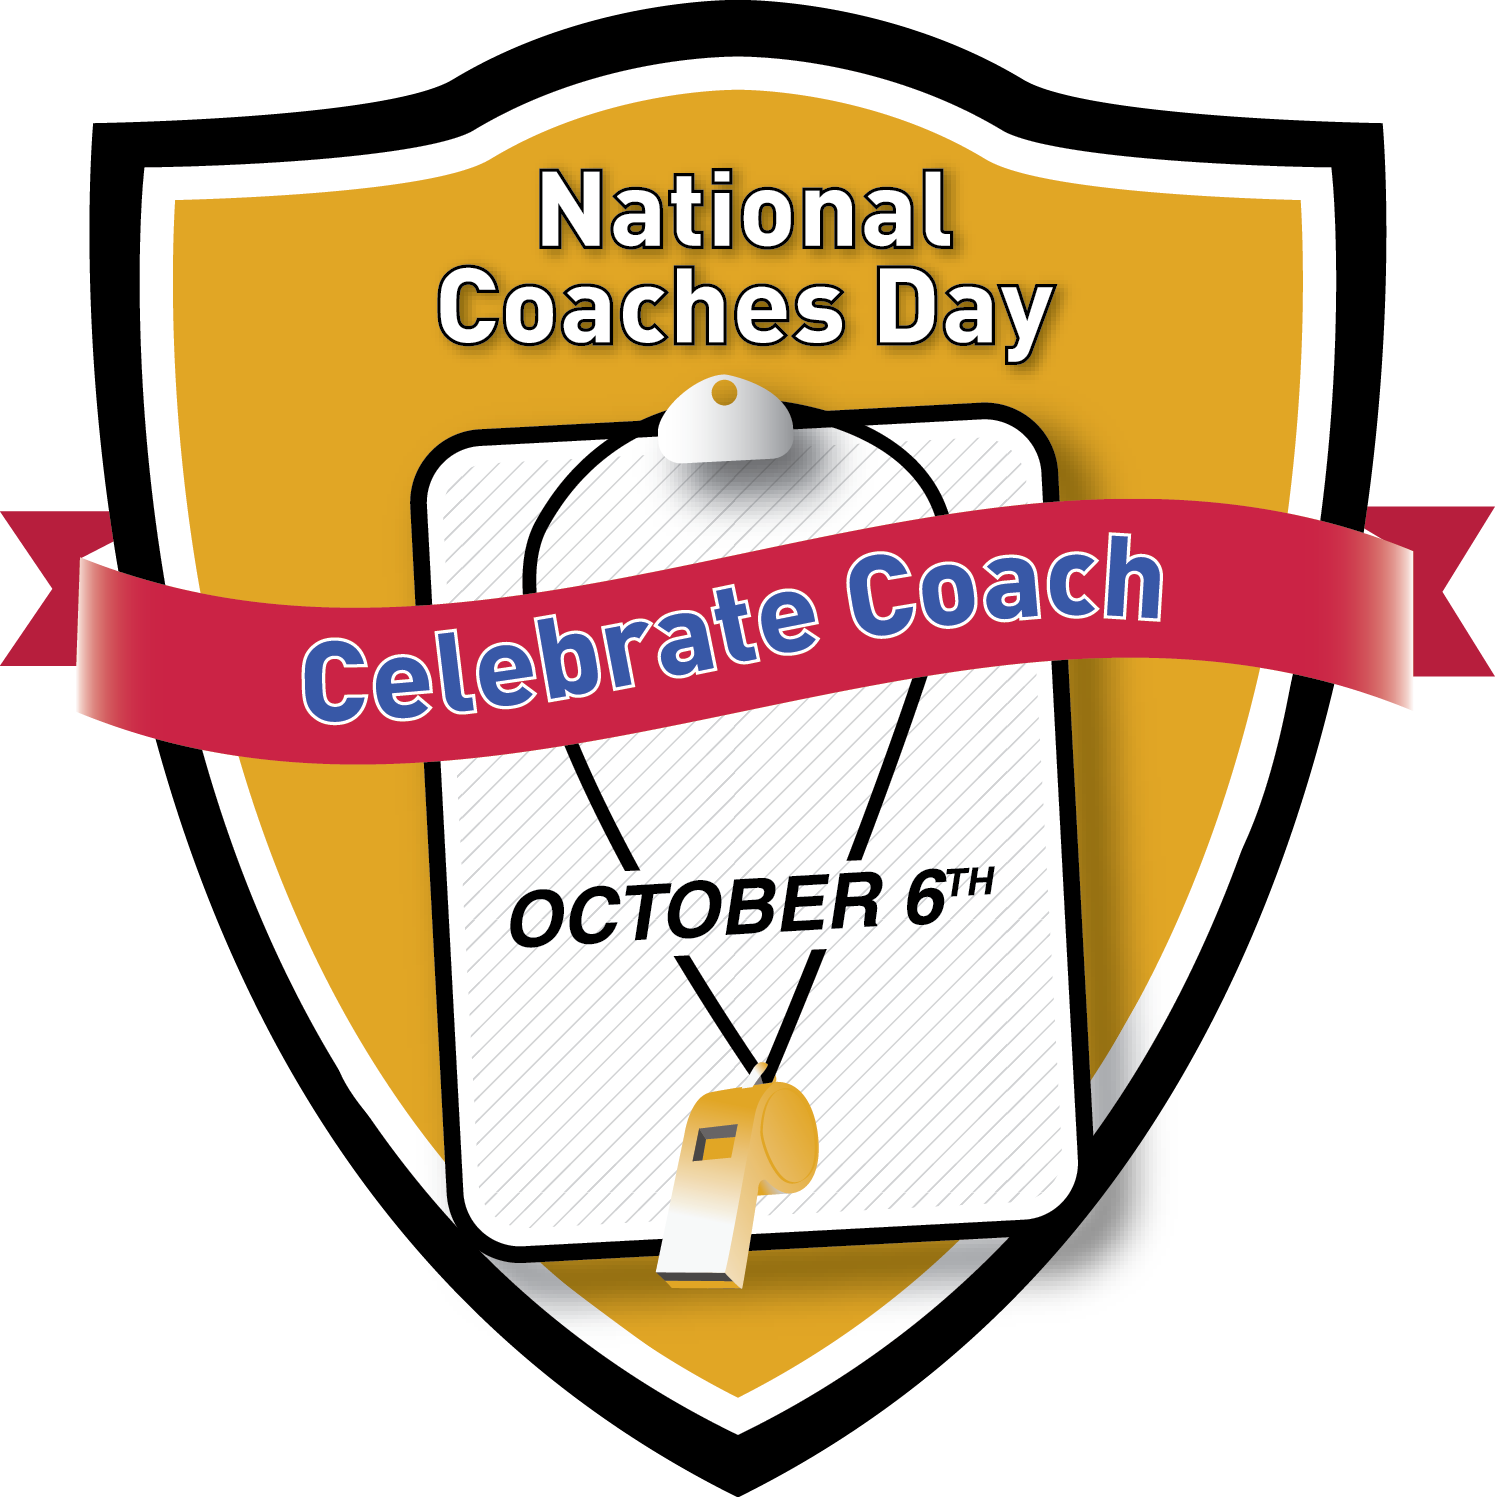 NFP Sports Announces Inaugural National Coaches Day Award Program